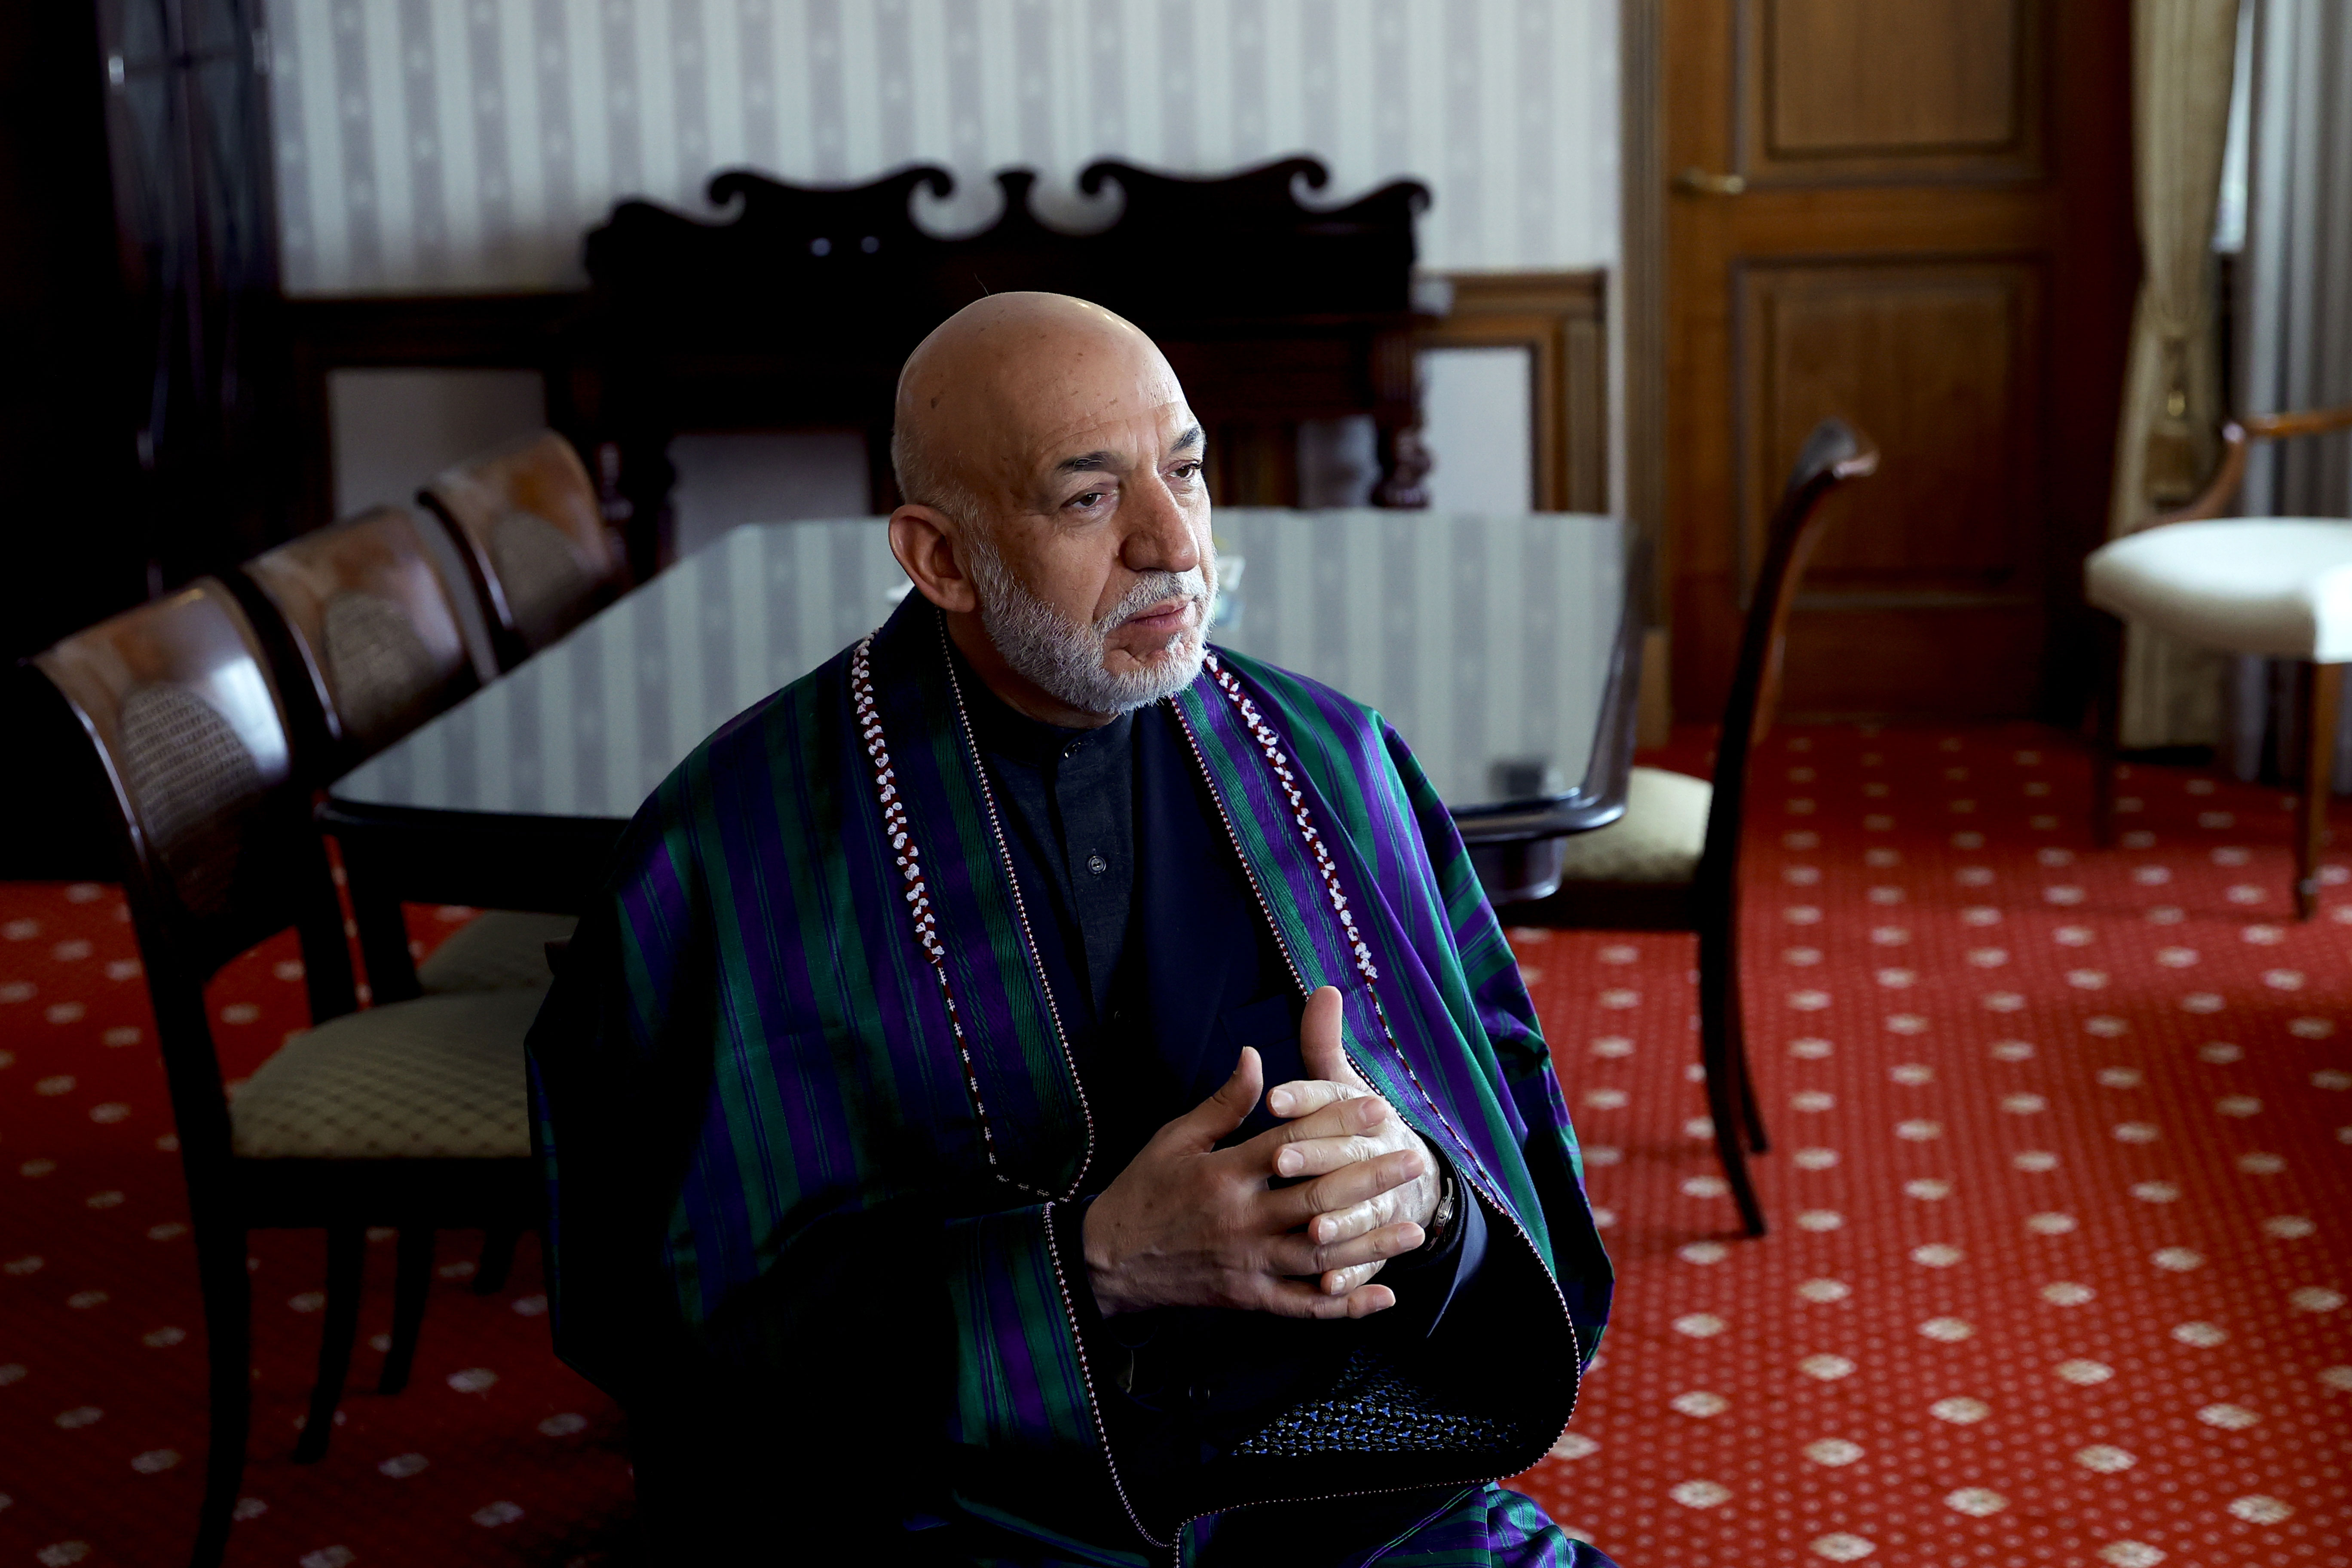 Former President of Afghanistan Hamid Karzai speaks during an interview with Anadolu Agency in Moscow on March 25, 2021.